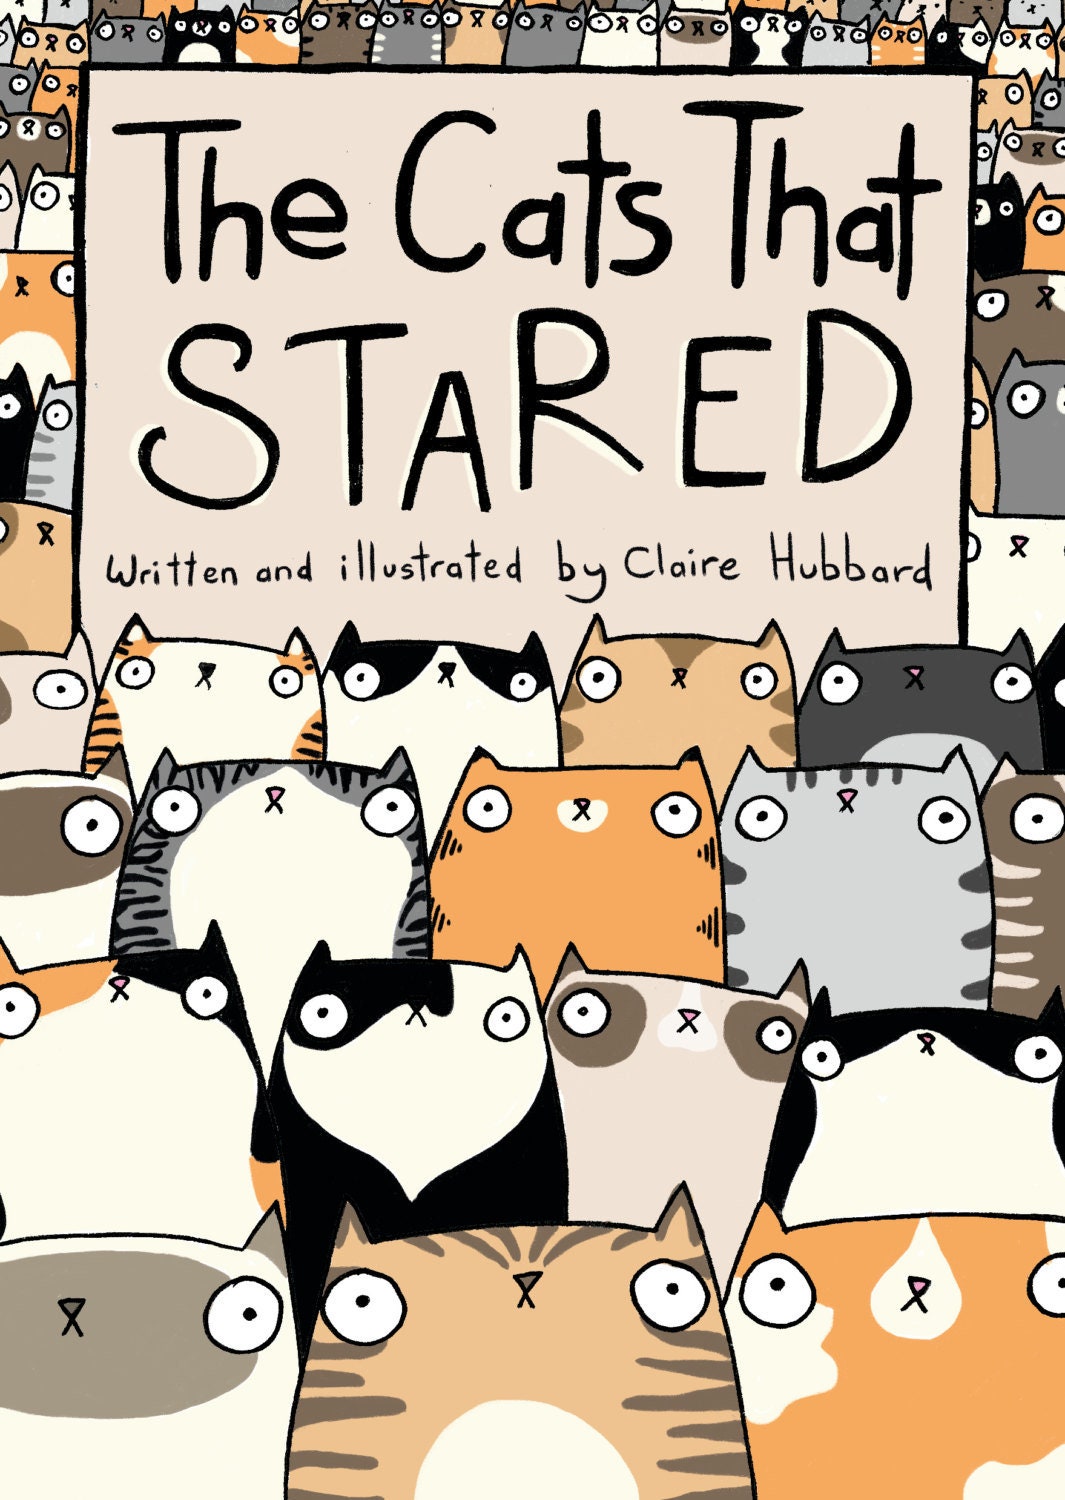 The Cats That Stared Comic Book by Claire Hubbard